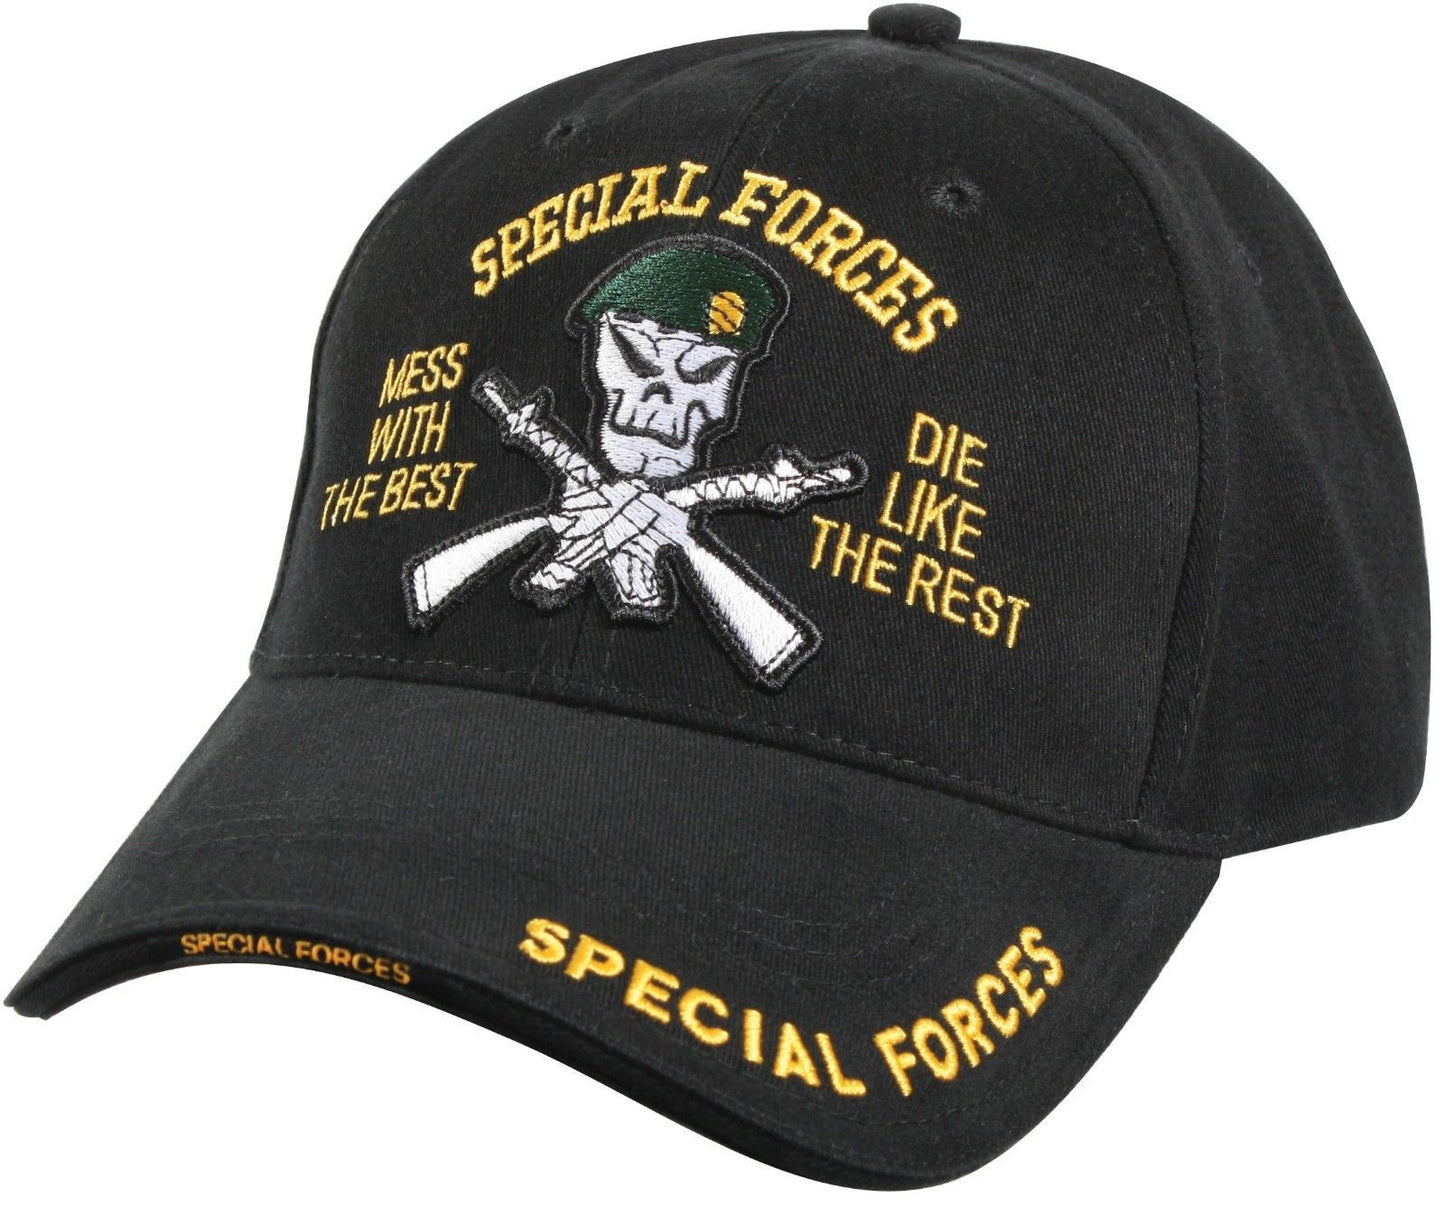 Special Forces Cap Black - Deluxe Low Profile Insignia Hat